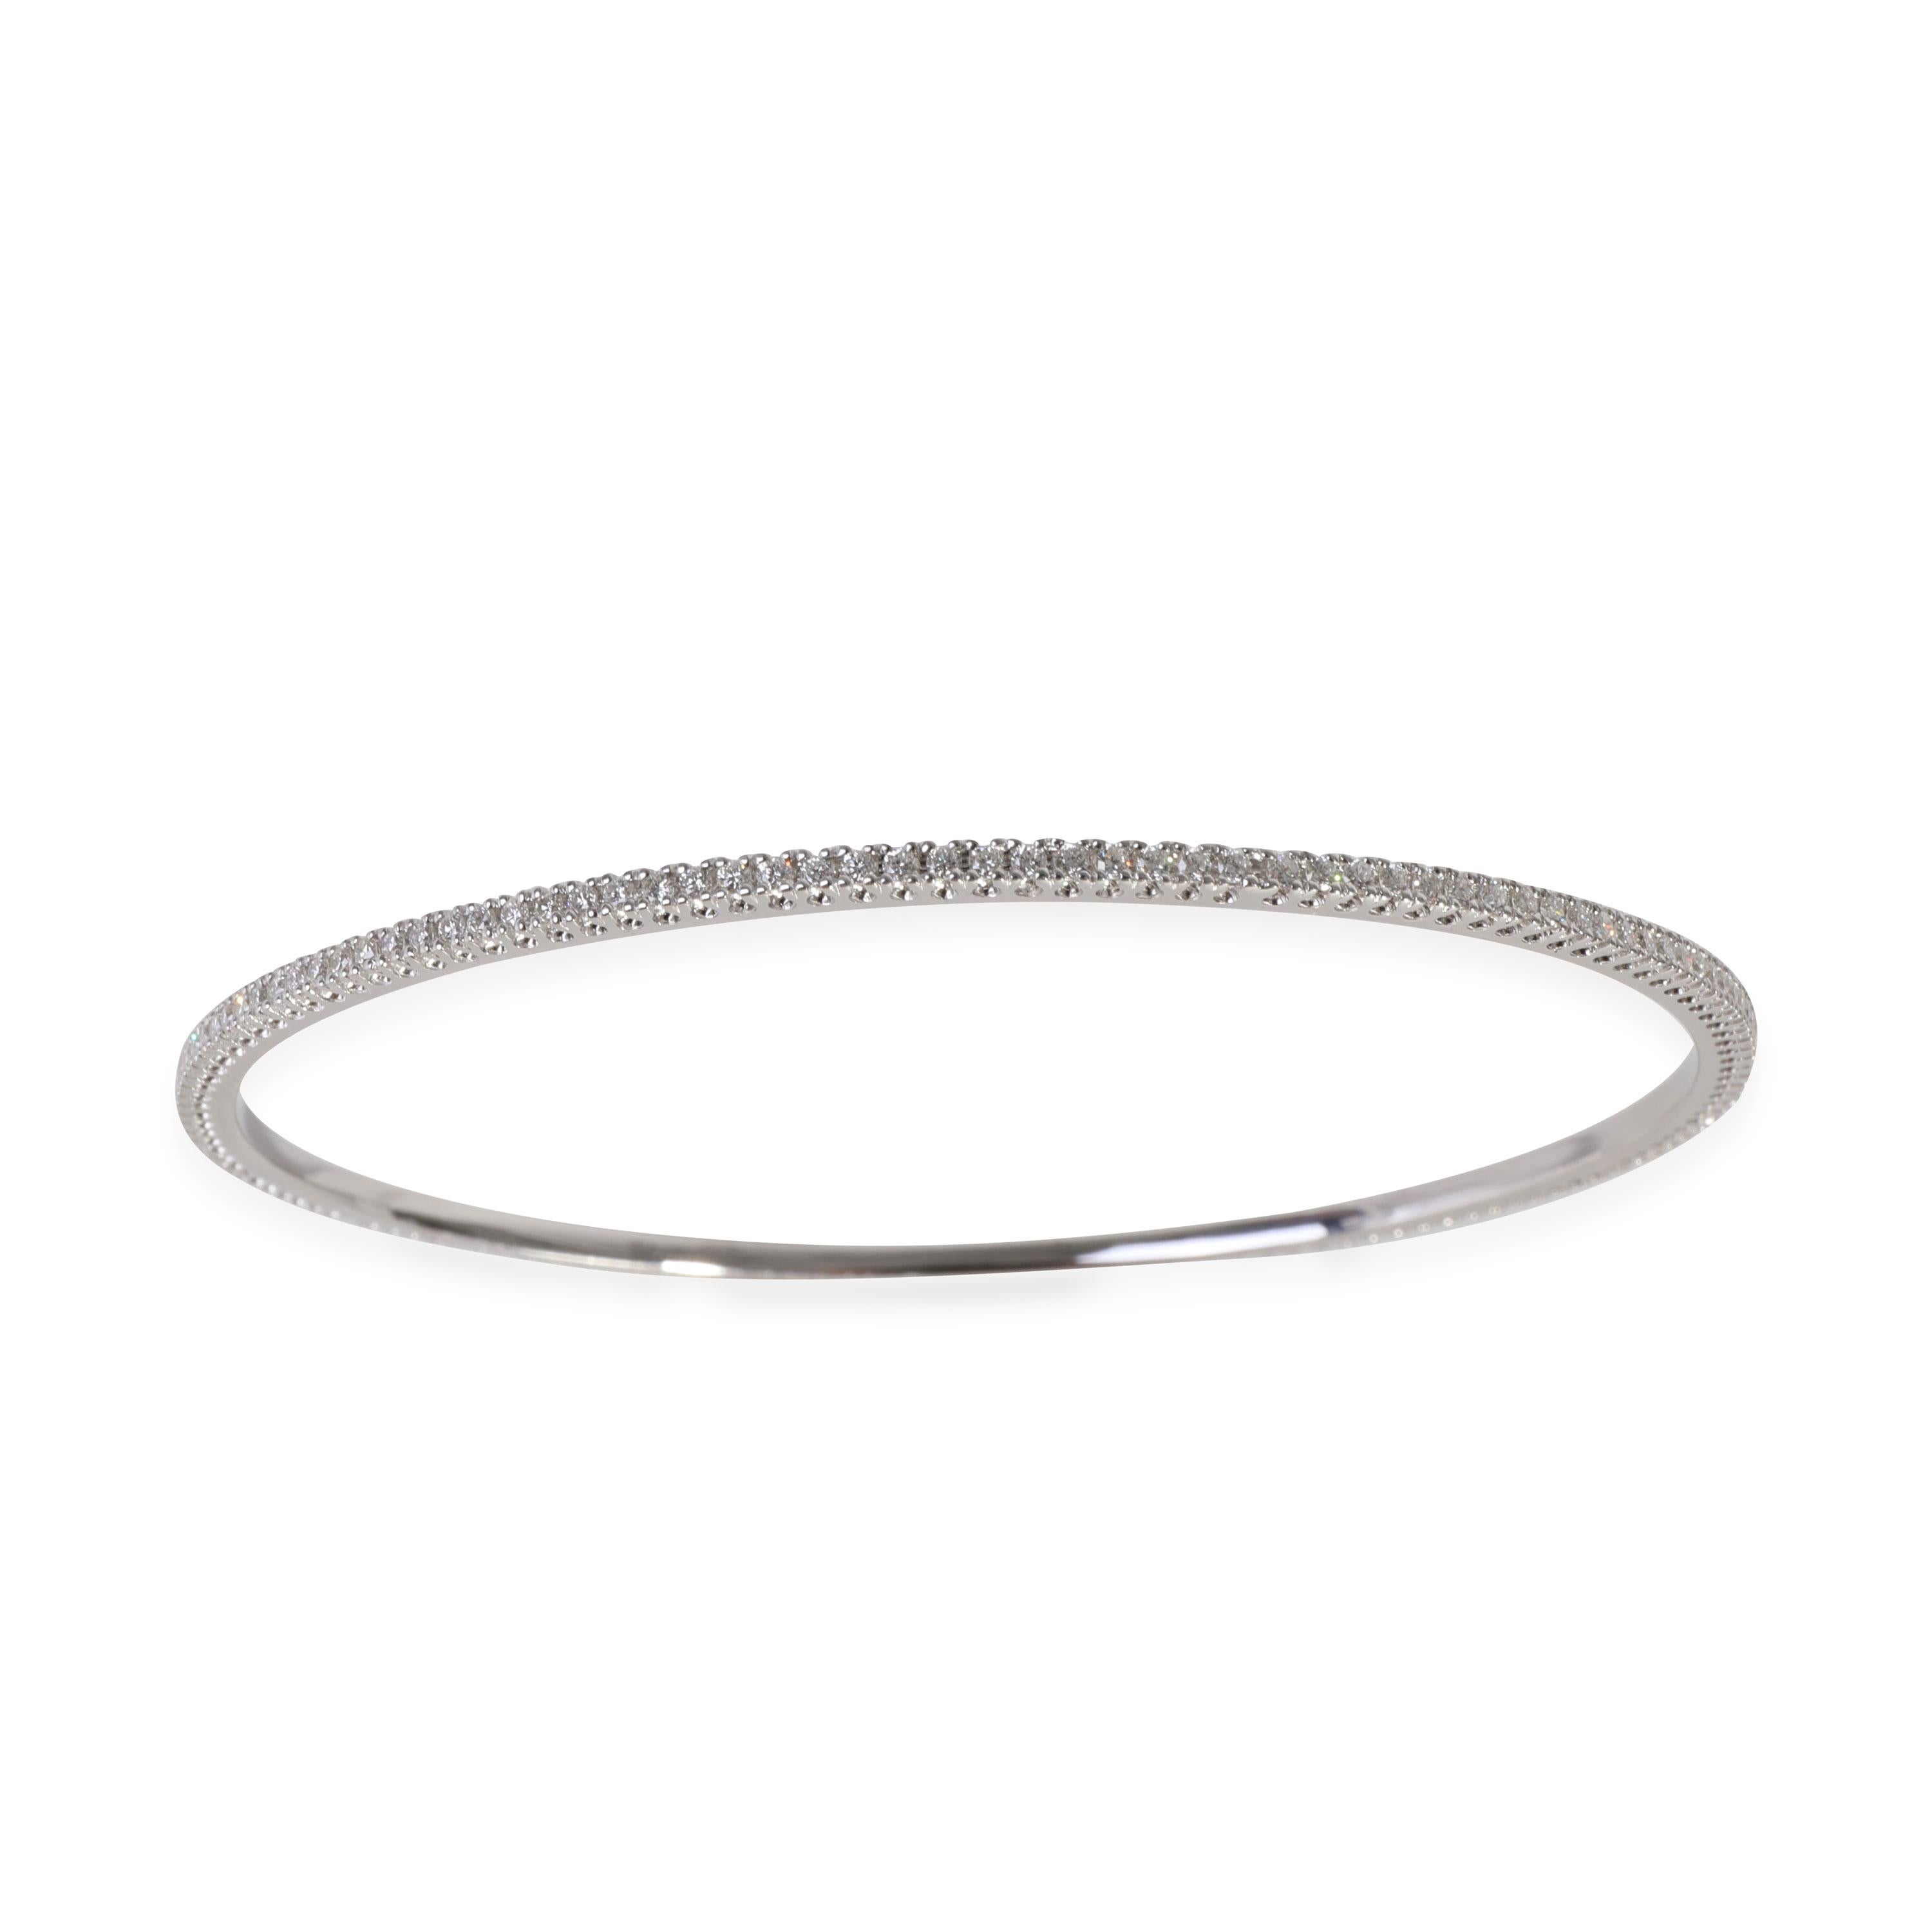 La Reina Diamond Bangle in 18k White Gold 1 CTW

PRIMARY DETAILS
SKU: 118052
Listing Title: La Reina Diamond Bangle in 18k White Gold 1 CTW
Condition Description: Retails for 3500 USD. In excellent condition and recently polished. Chain is 7.75